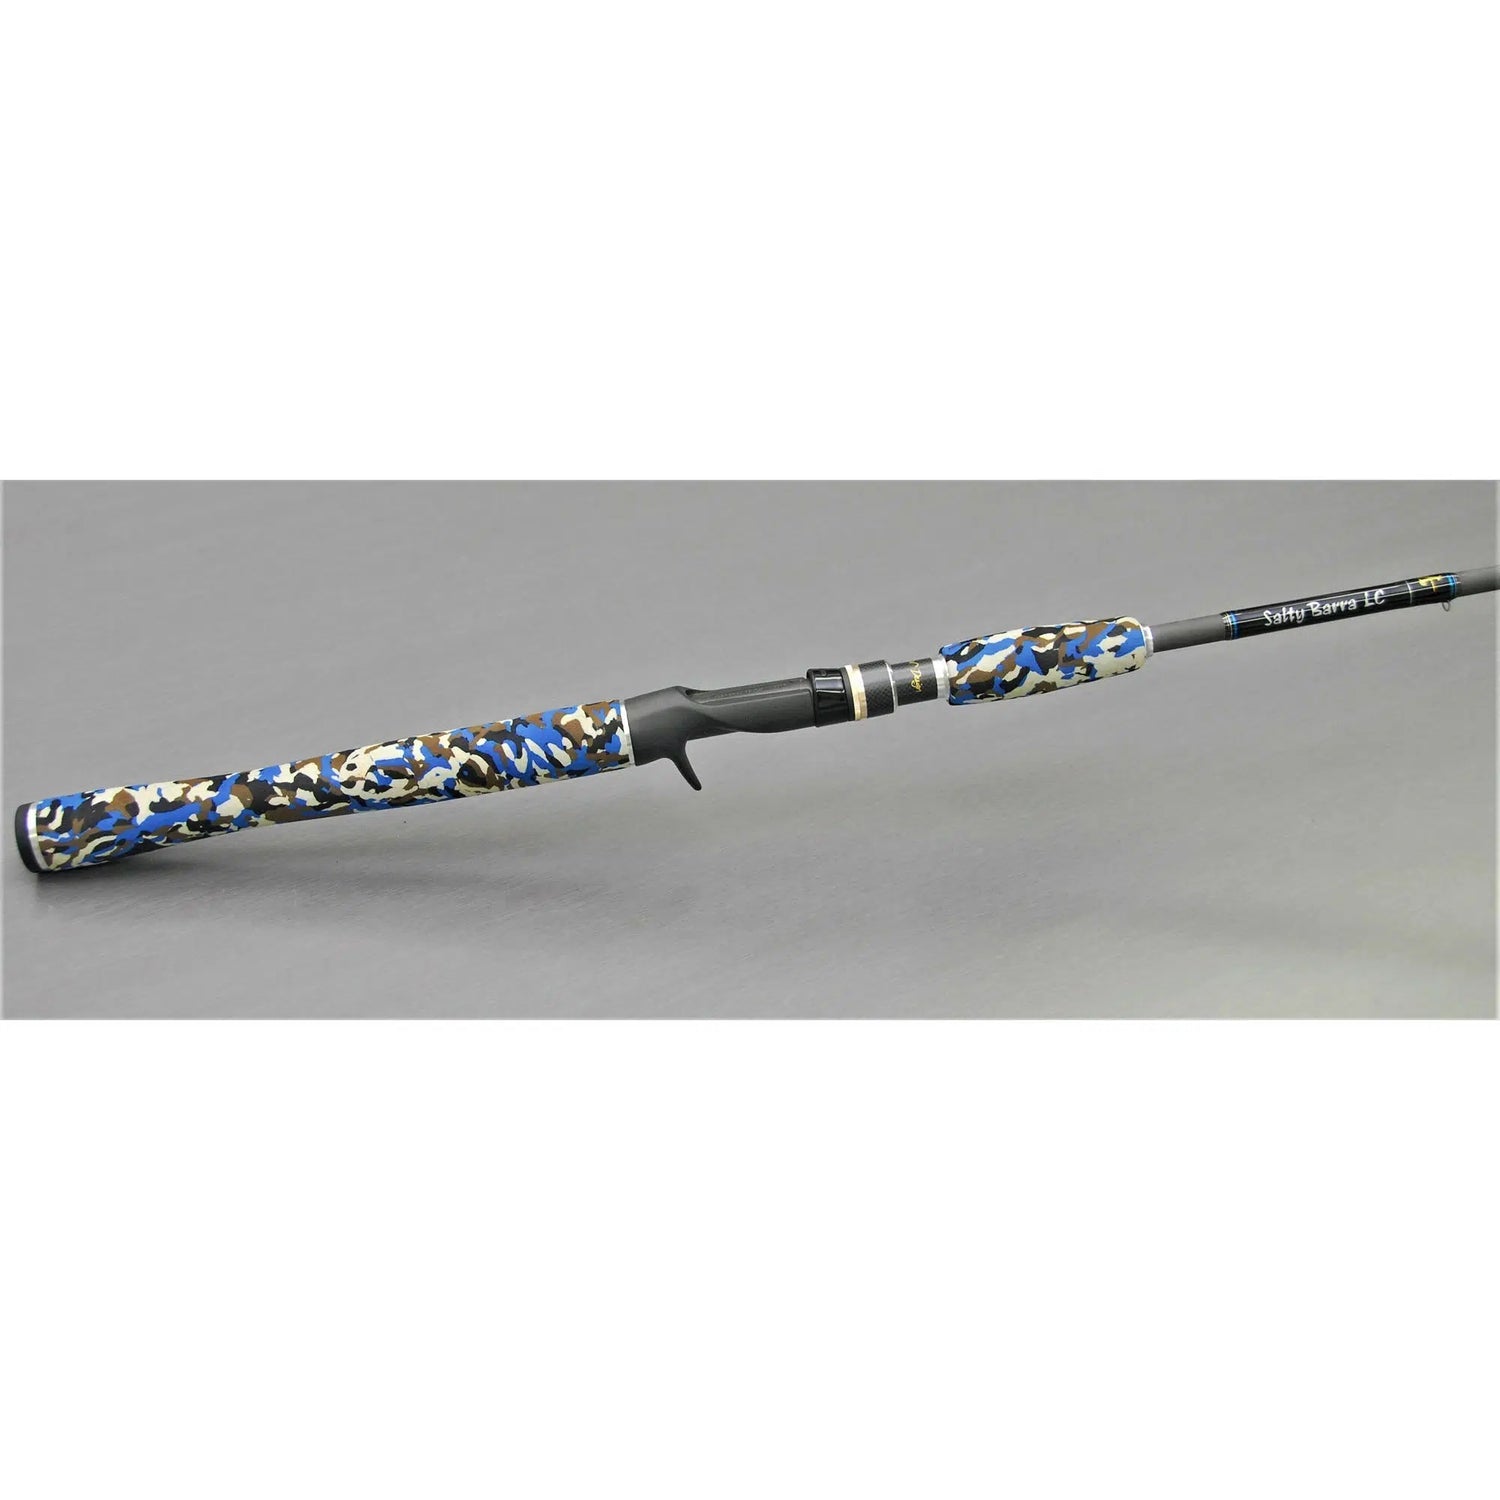 Millerods Production Rod-Rod-Millerods-Baitcast-Salty Barra LC 632-Fishing Station